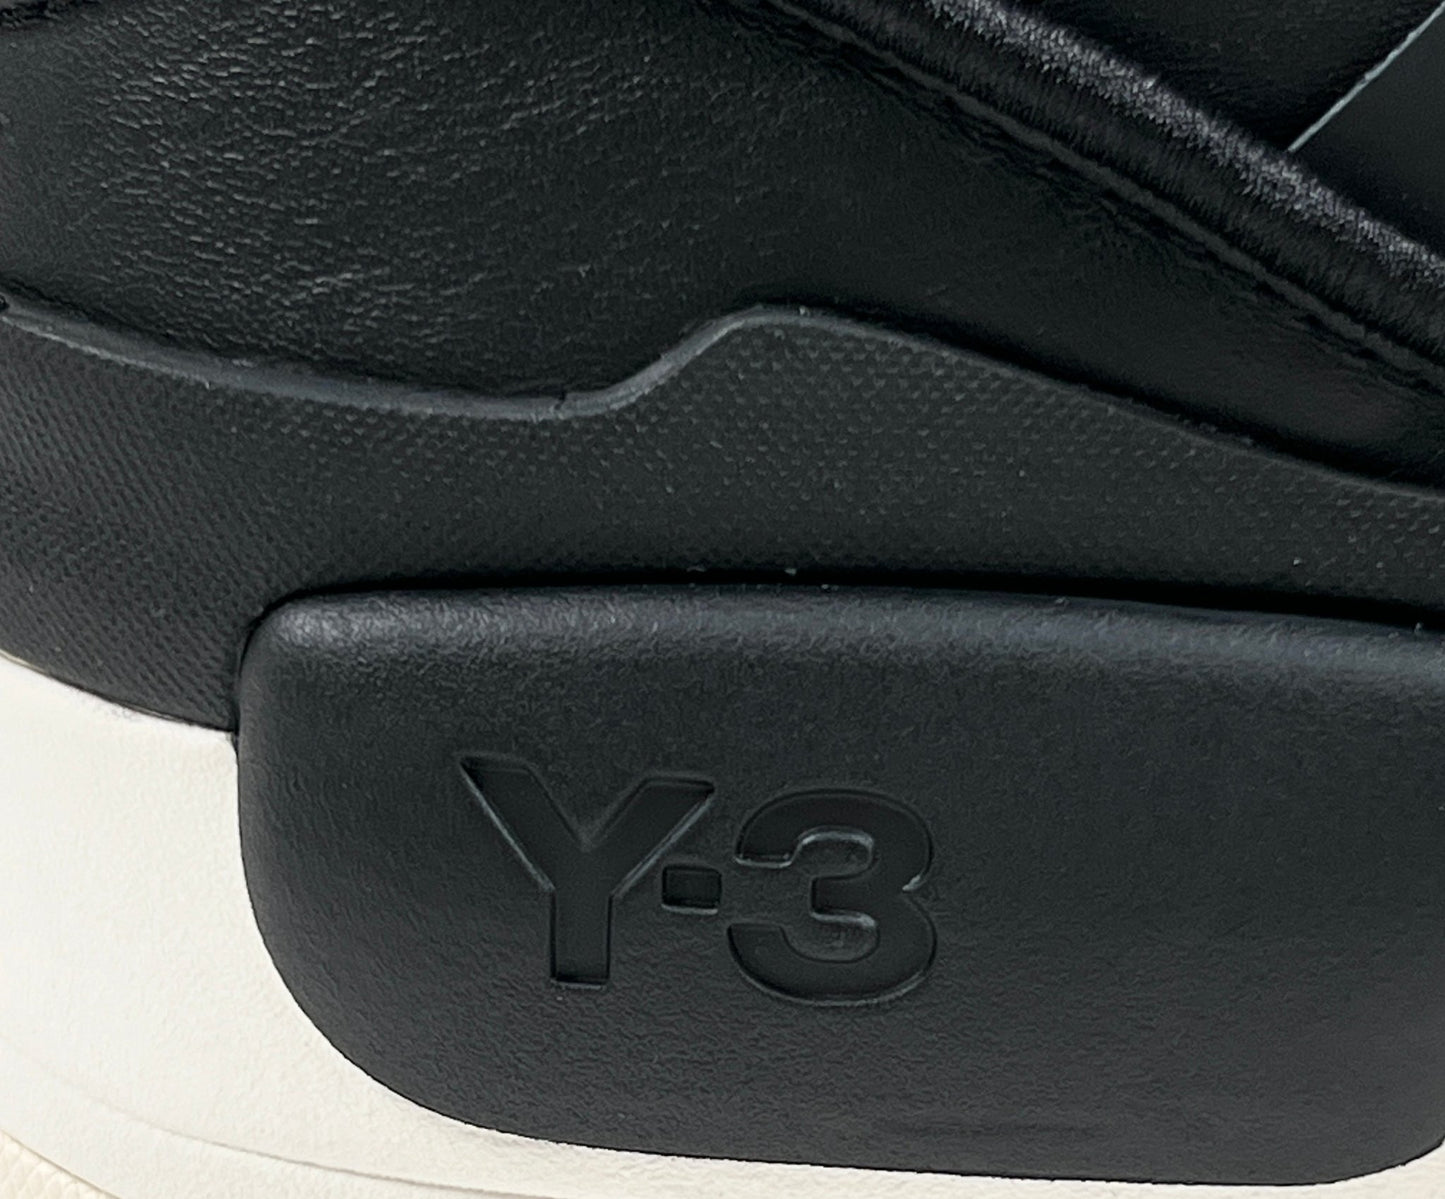 A close-up of a black and white ADIDAS x Y-3 Rivalry sneaker.